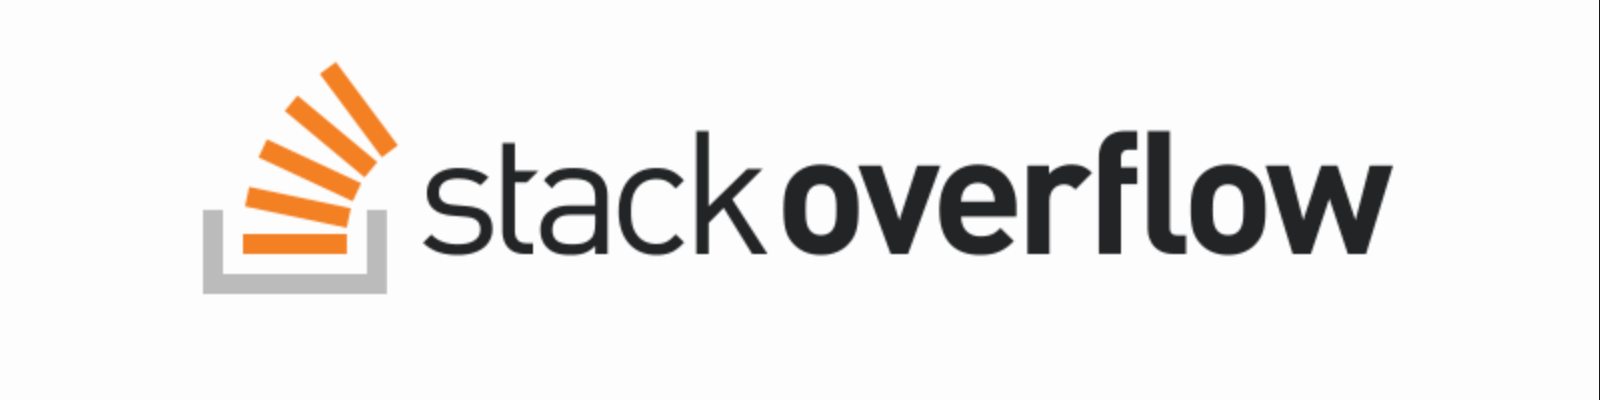 What's wrong with StackOverflow cover image